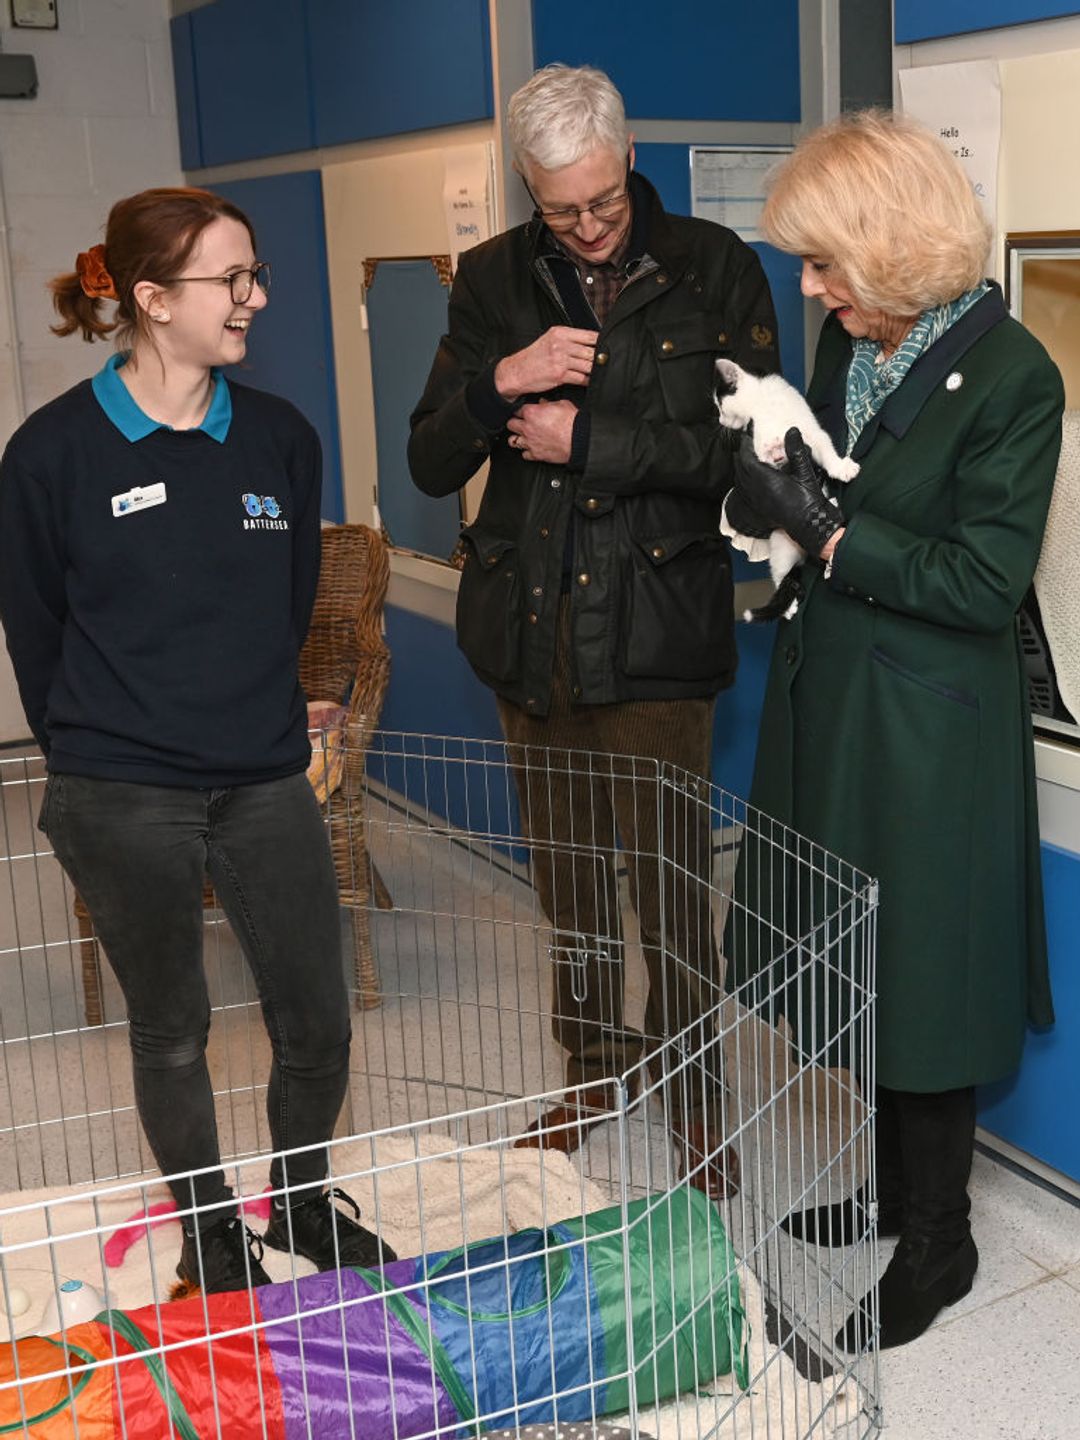 Camilla, Duchess of Cornwall, patron of Battersea Dogs and Cats Home, and Battersea Ambassador Paul O'Grady hold cats during their visit to Battersea Brand Hatch Centre